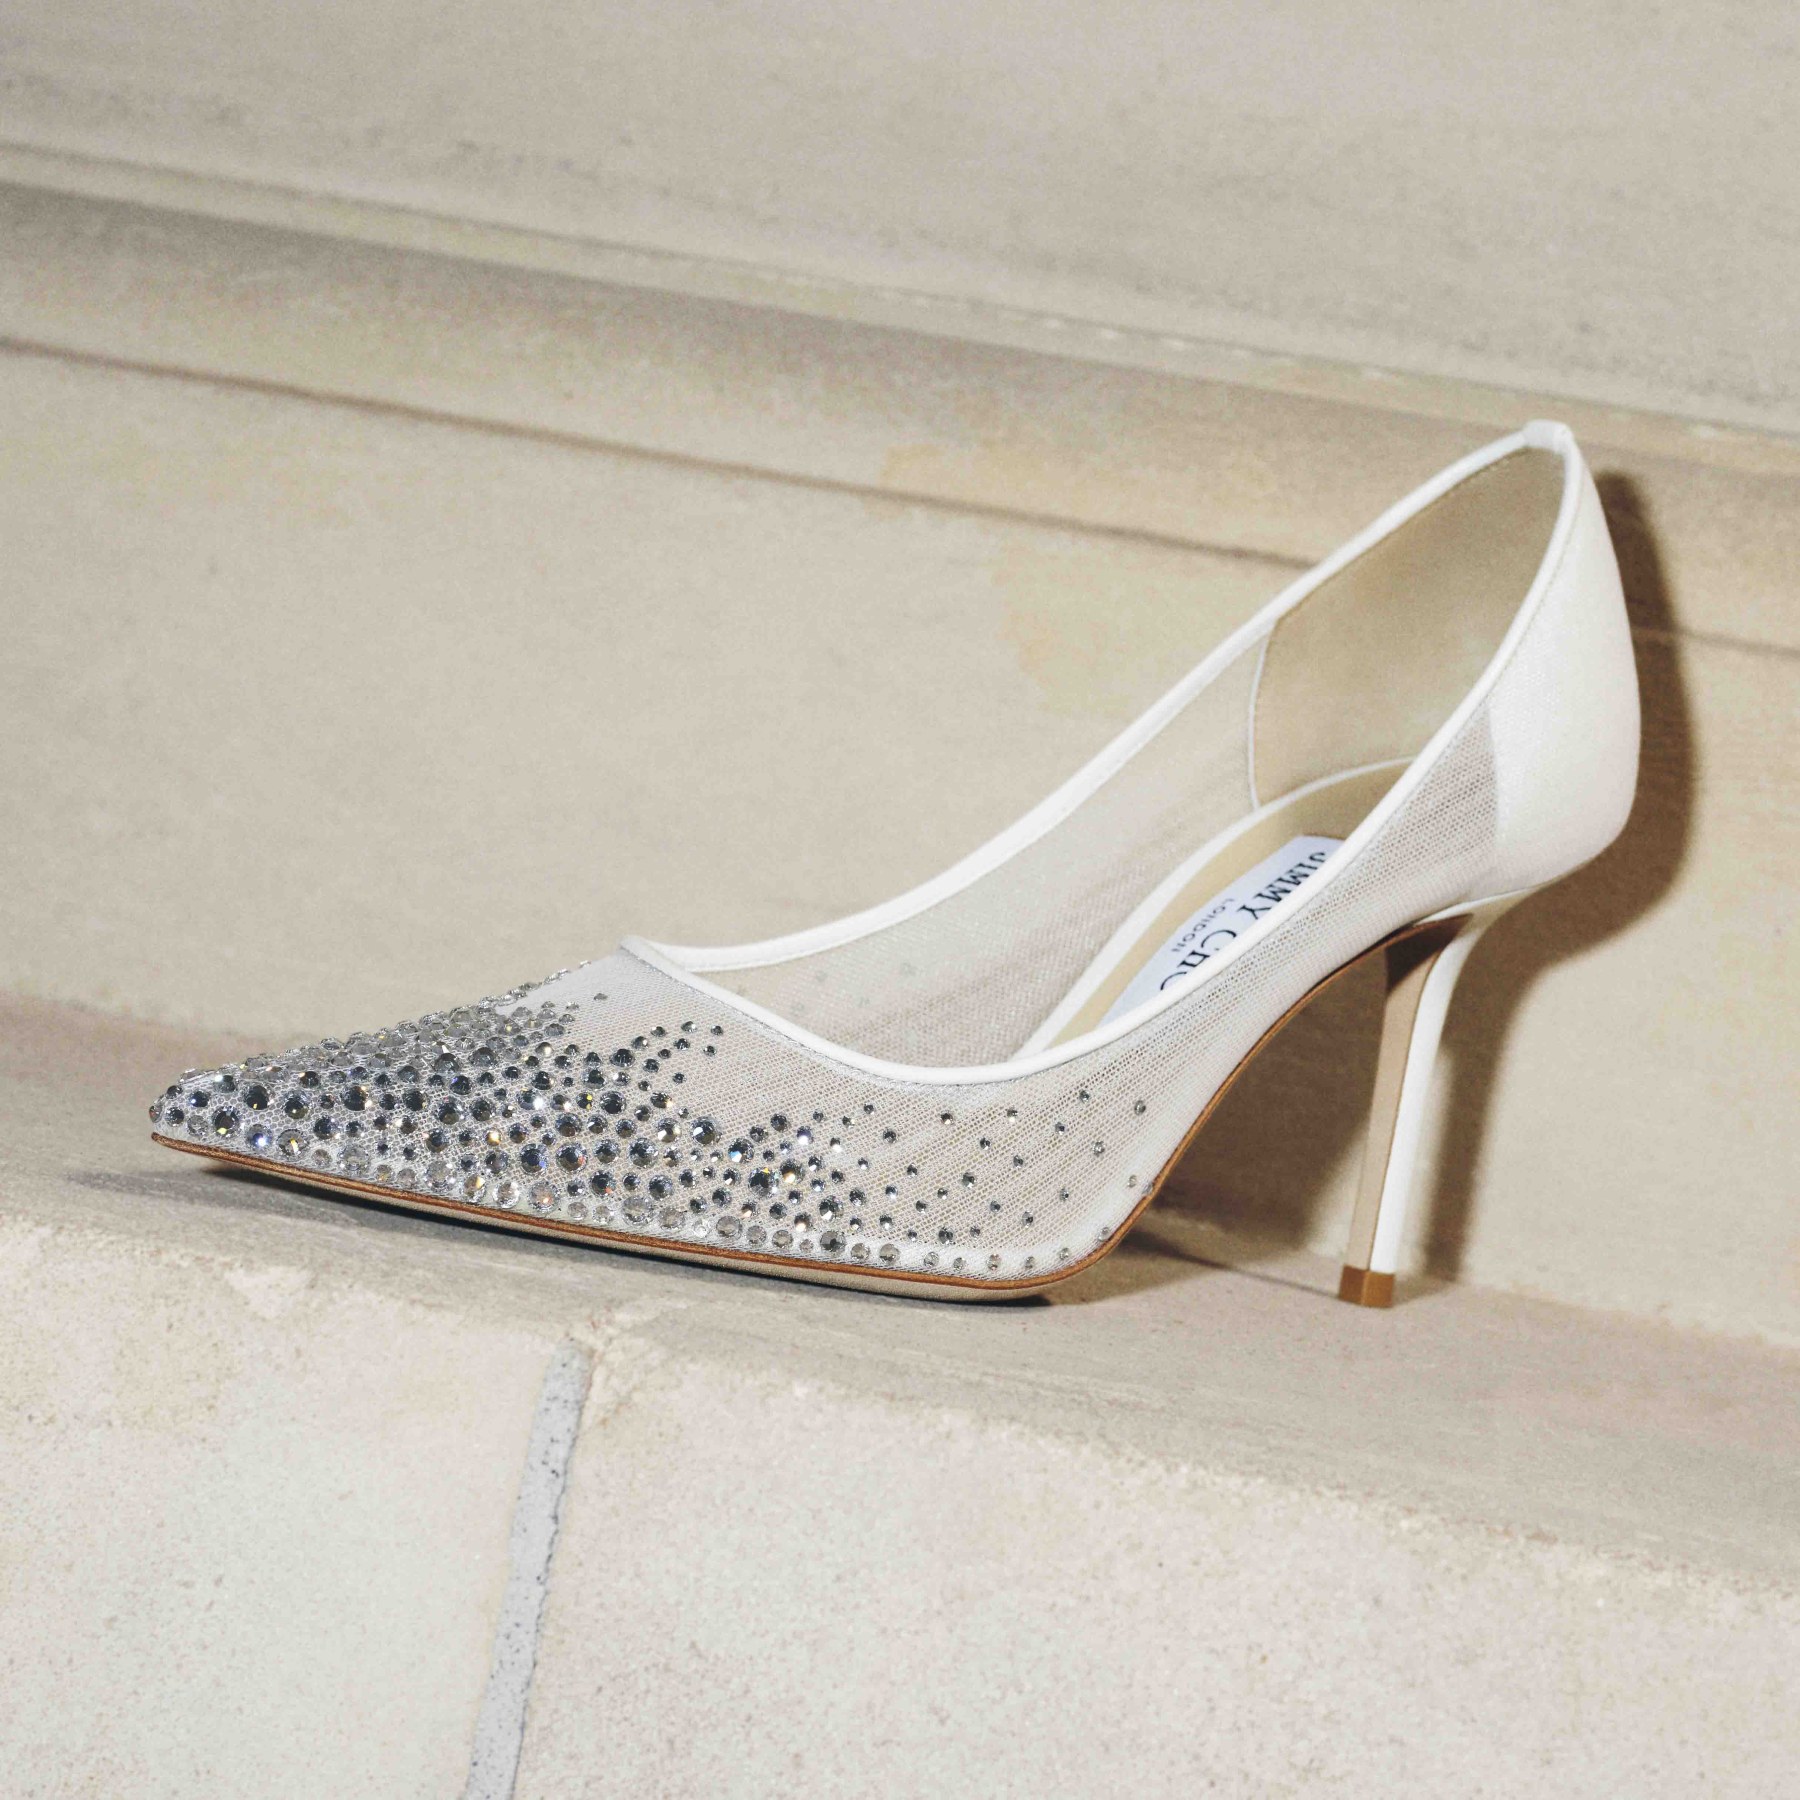 Kate Middleton's Jimmy Choo Romy 85 Pumps In White Leather